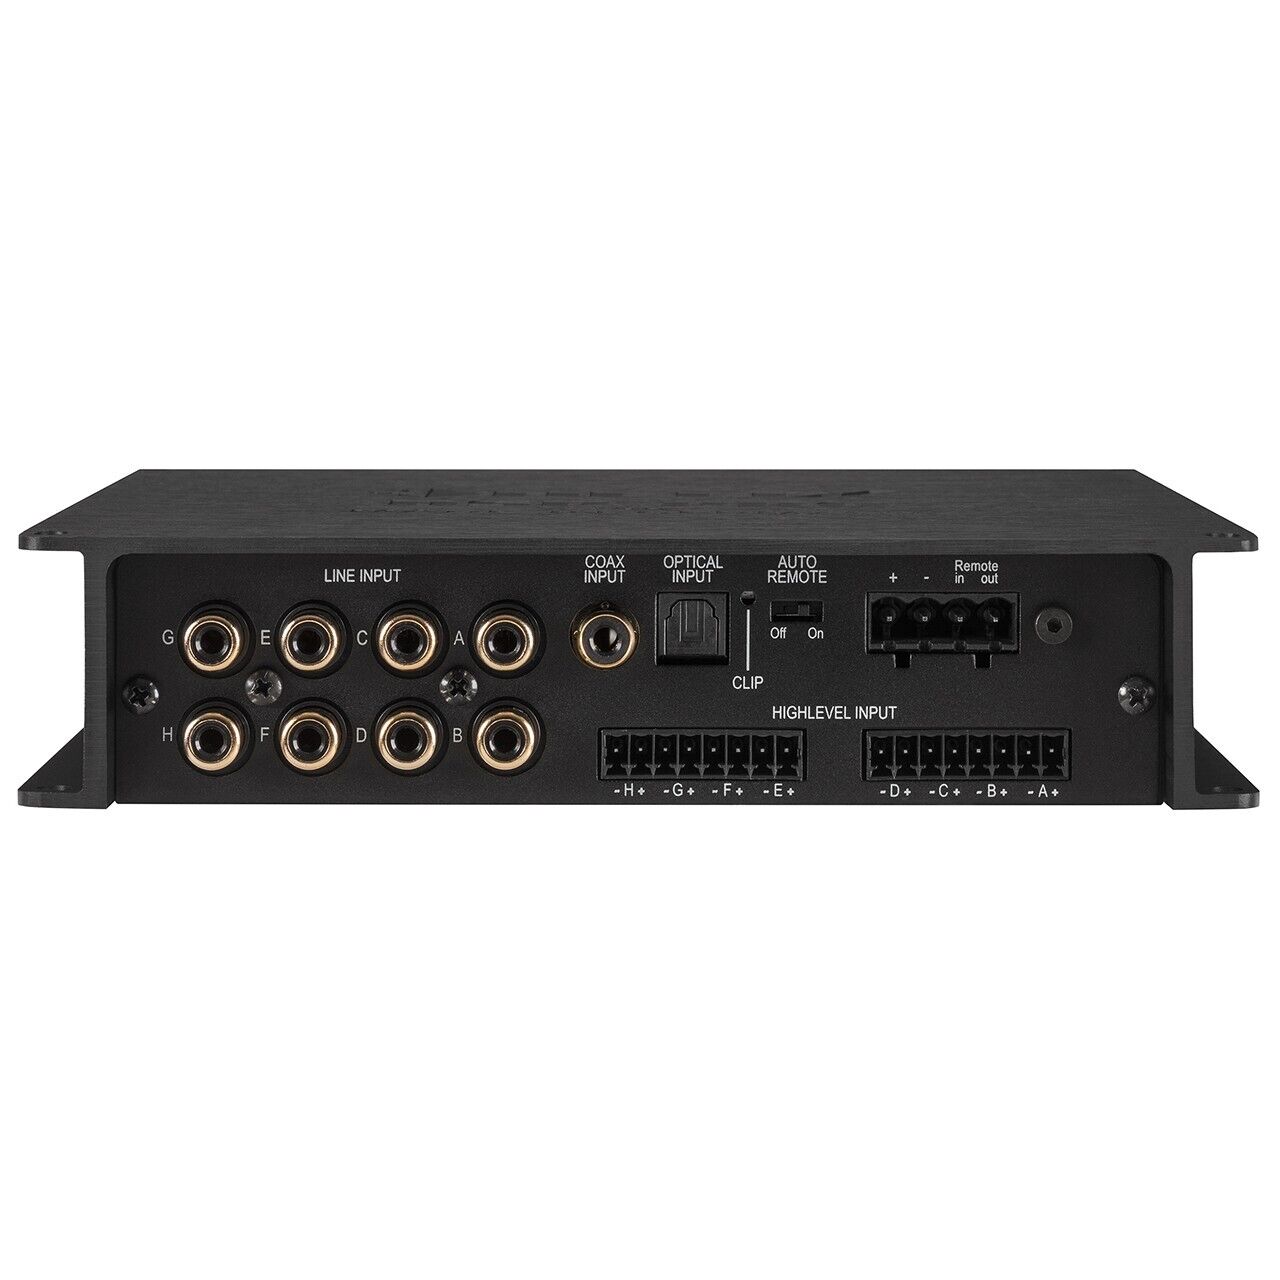 HELIX DSP PRO MK3 DSP ,10 OUTPUTS, LATEST VERSIO MADE IN GERMANY 1YEAR  WARRANTY